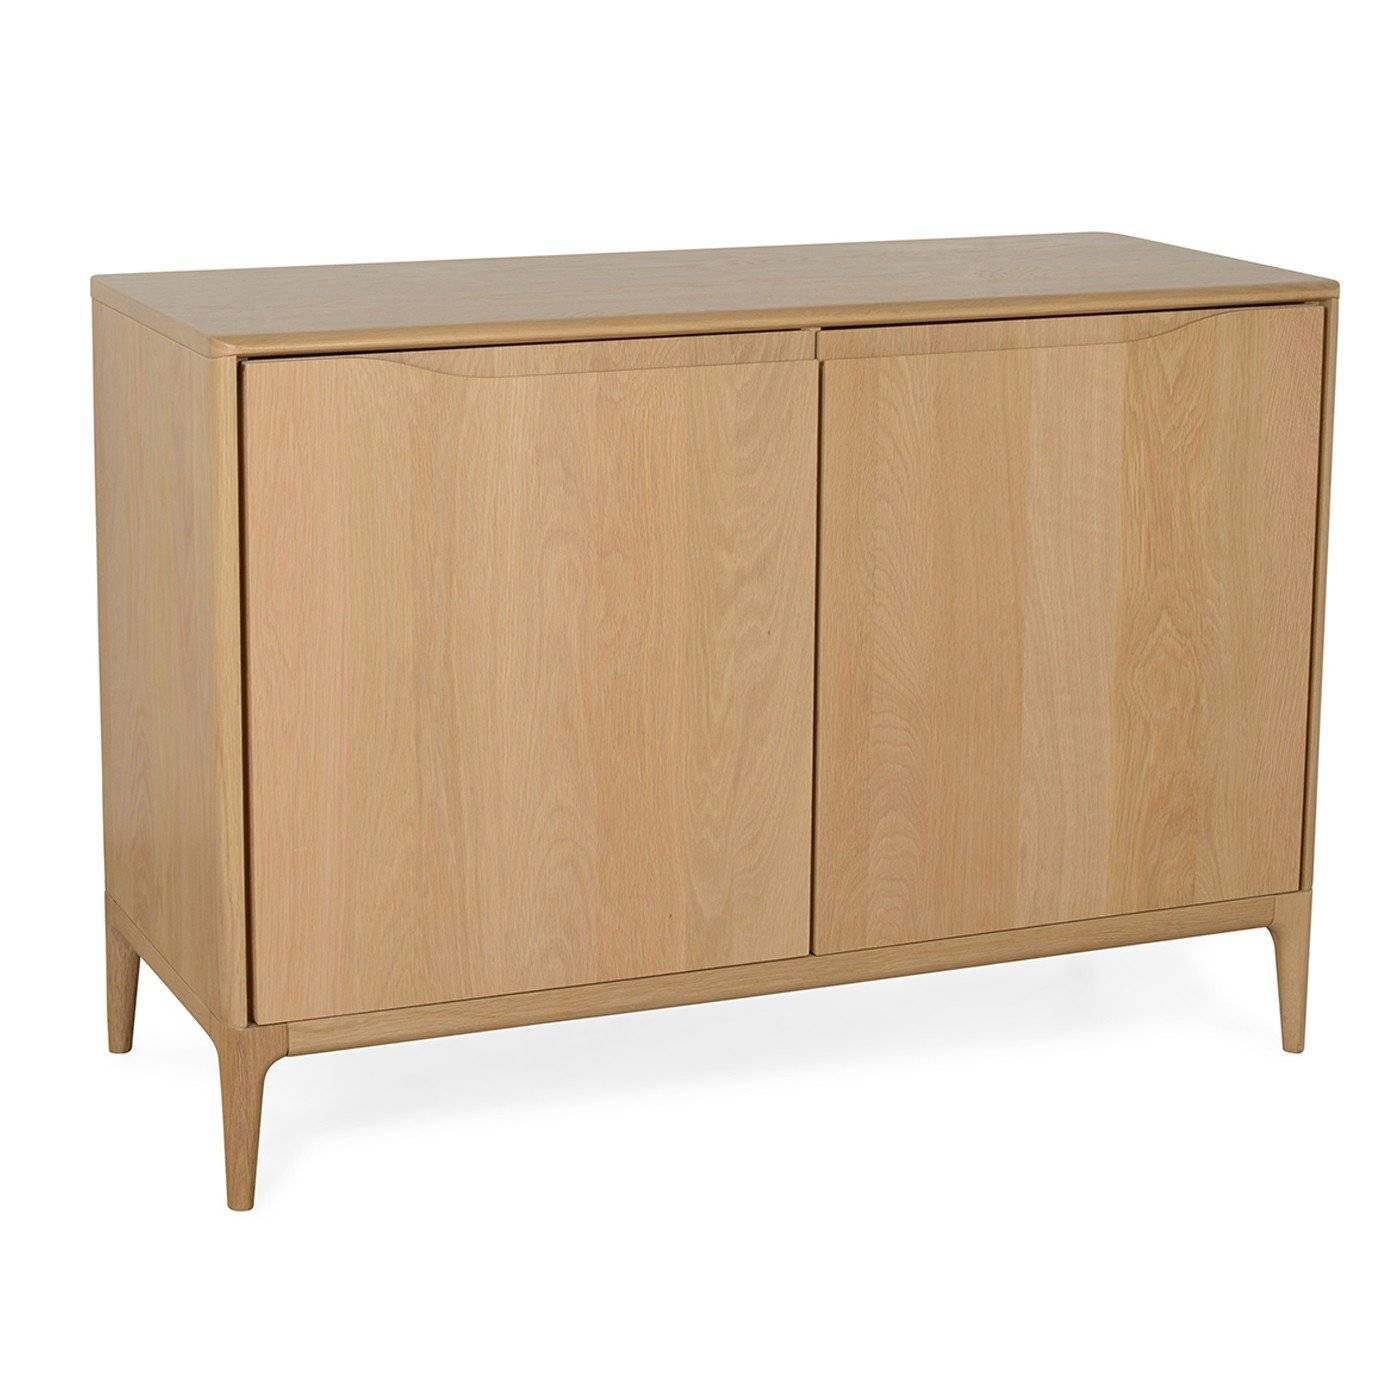 Designer Sideboards | Modern & Contemporary Sideboards | Heal's With Regard To Small Sideboard Cabinet (View 17 of 20)